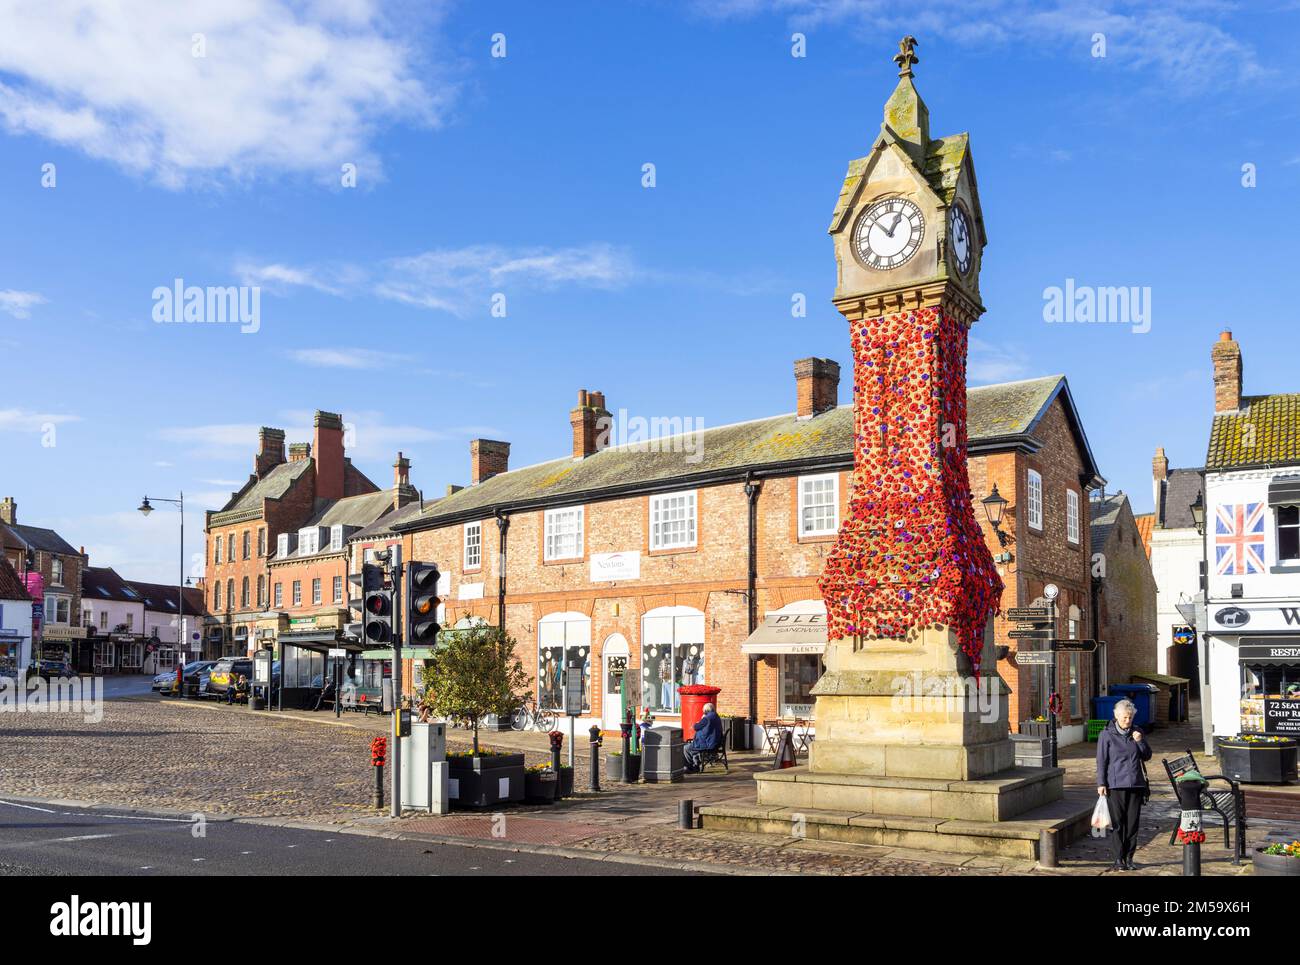 Thirsk North Yorkshire Thirsk Market Place Torre dell'Orologio Thirsk con bombardamento di fili thirsk North Yorkshire Inghilterra UK GB Europe Foto Stock